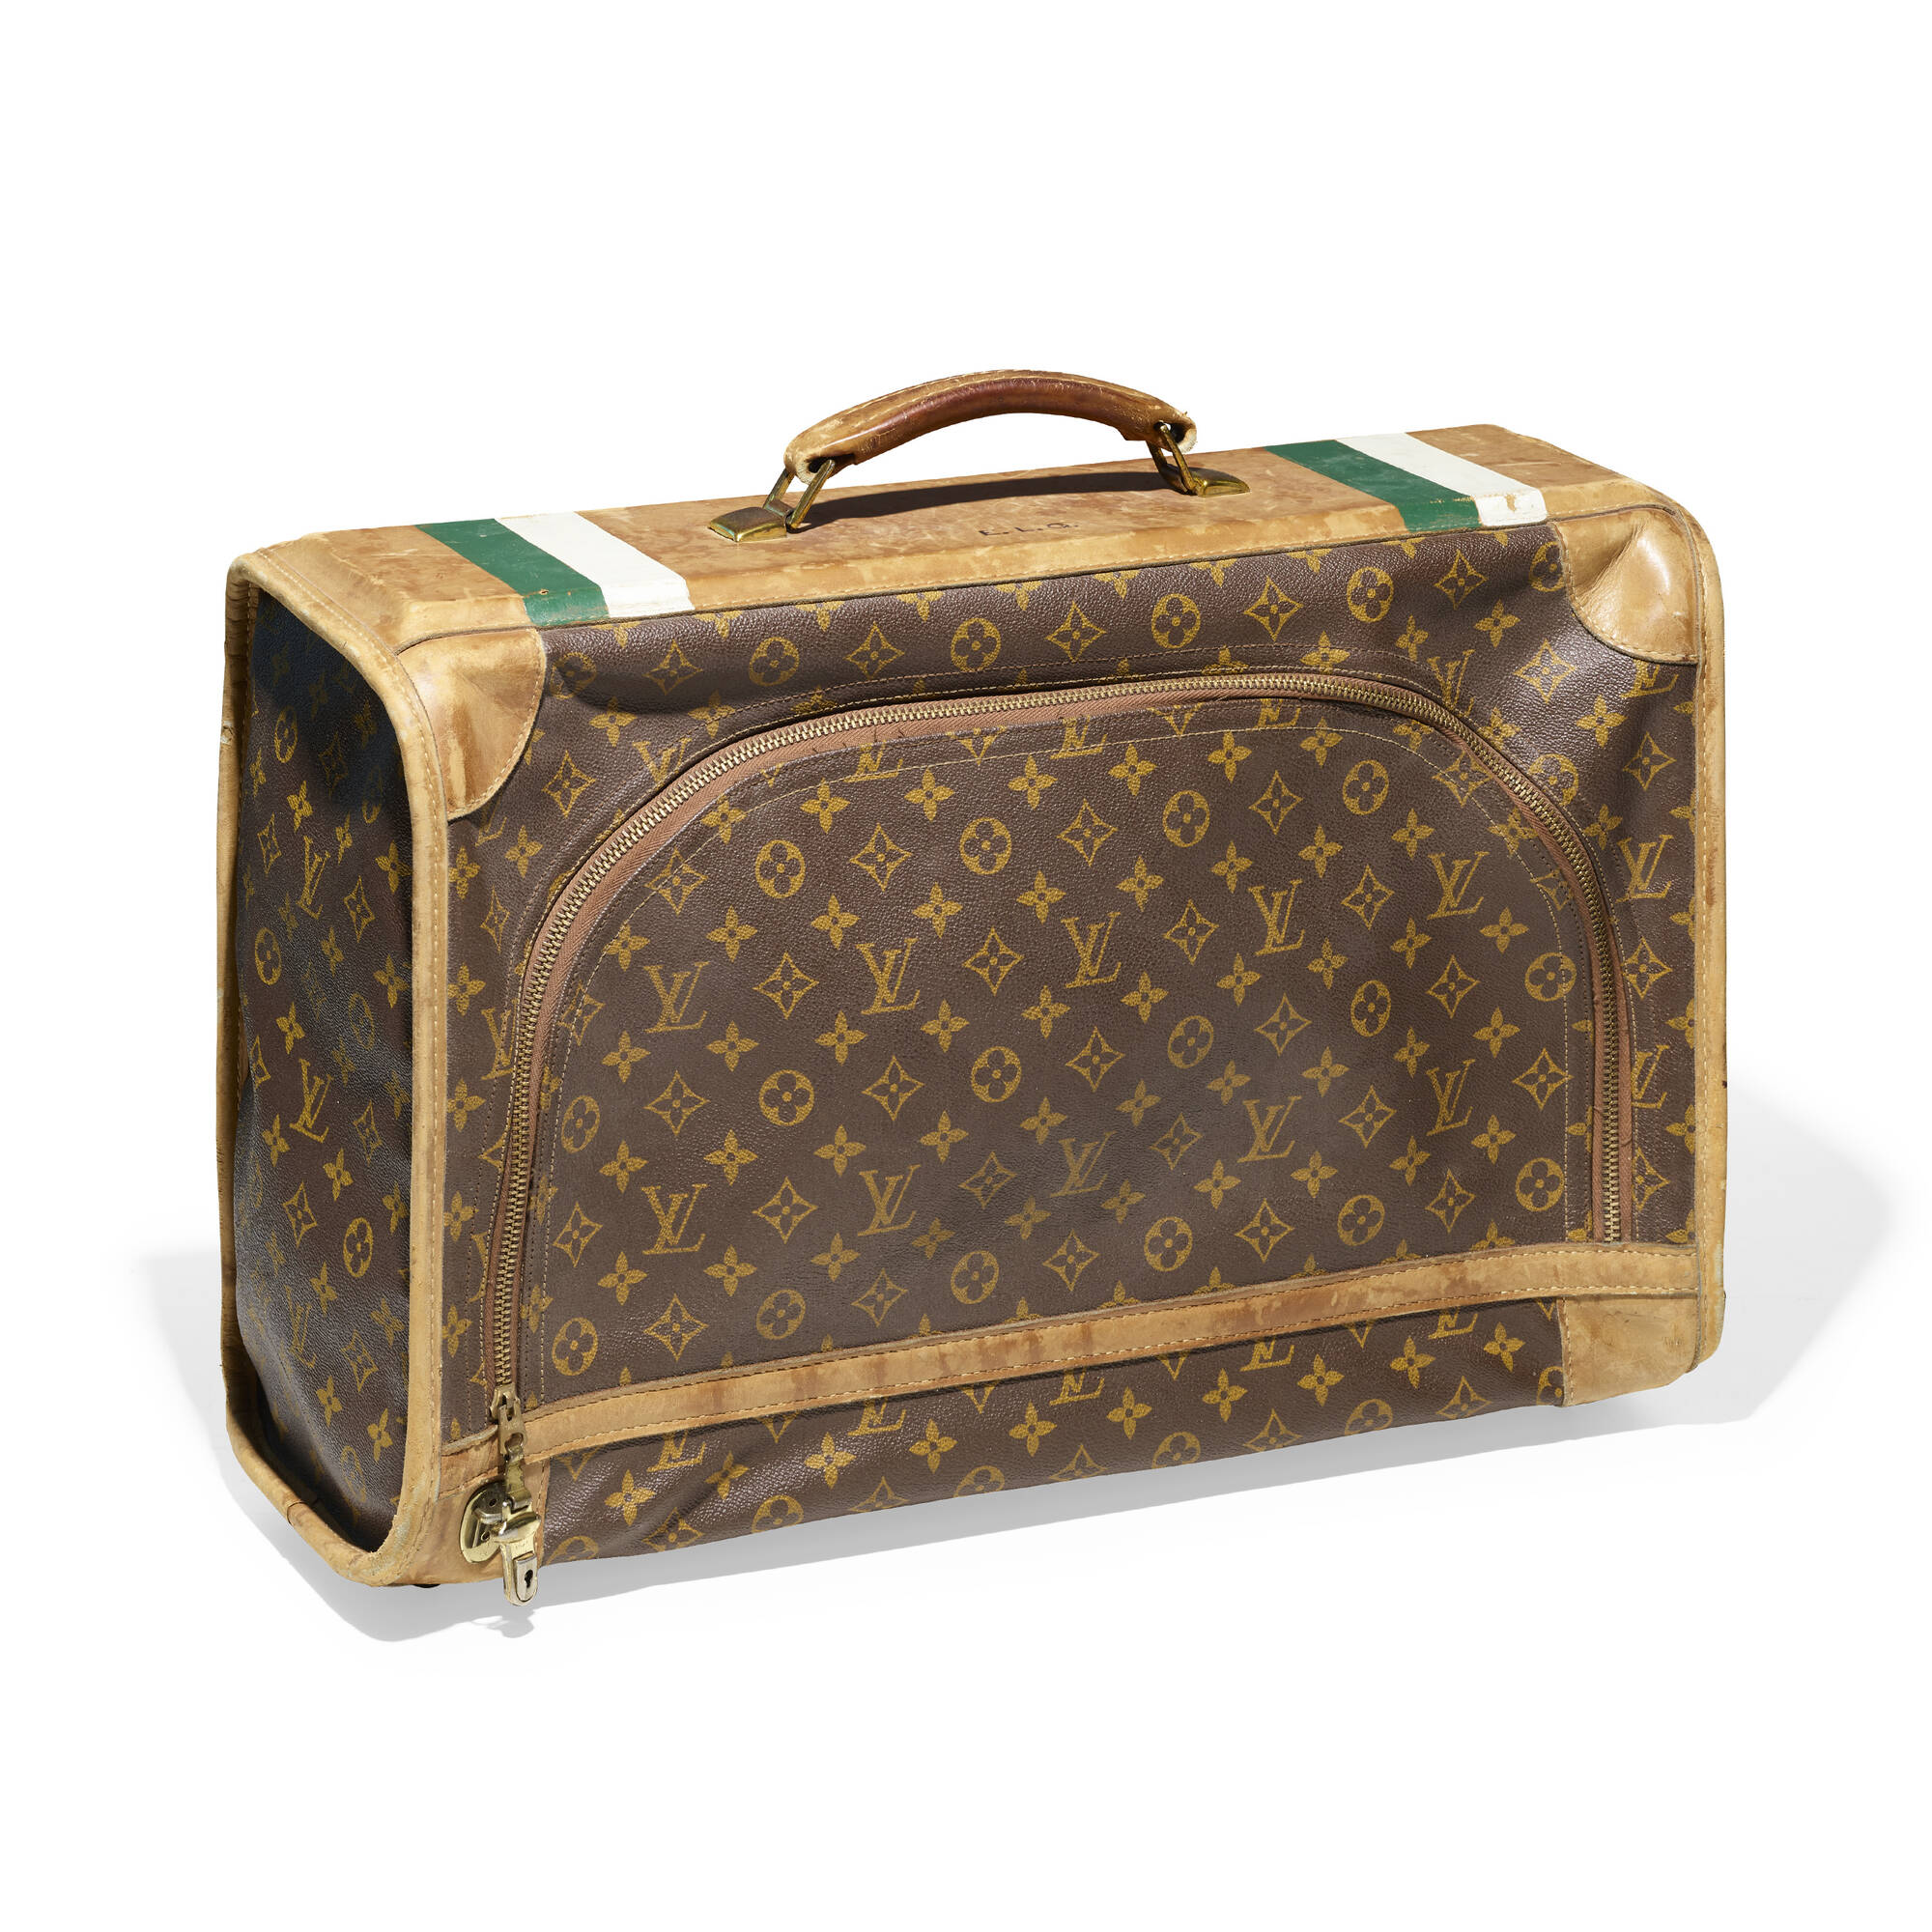 Vintage Louis Vuitton The French Company Pullman 60 Suitcase